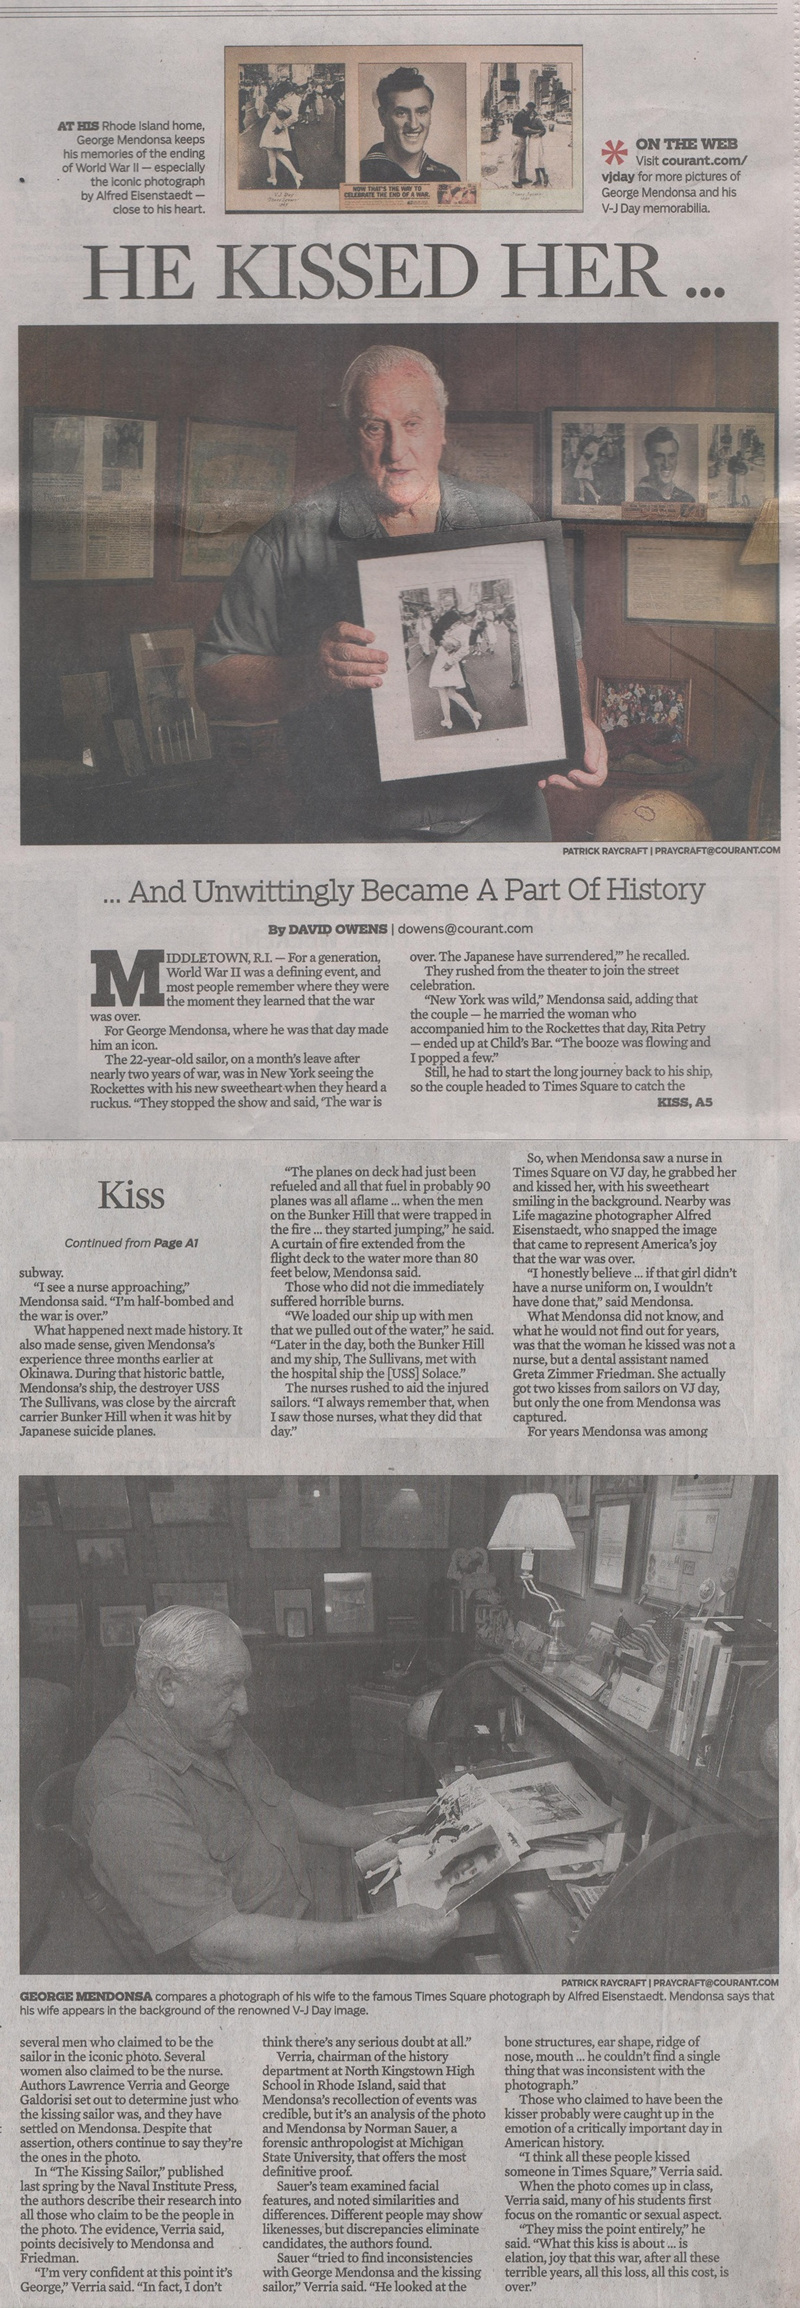 News article in The Hartford Courant discussing the story behind the photo titled 